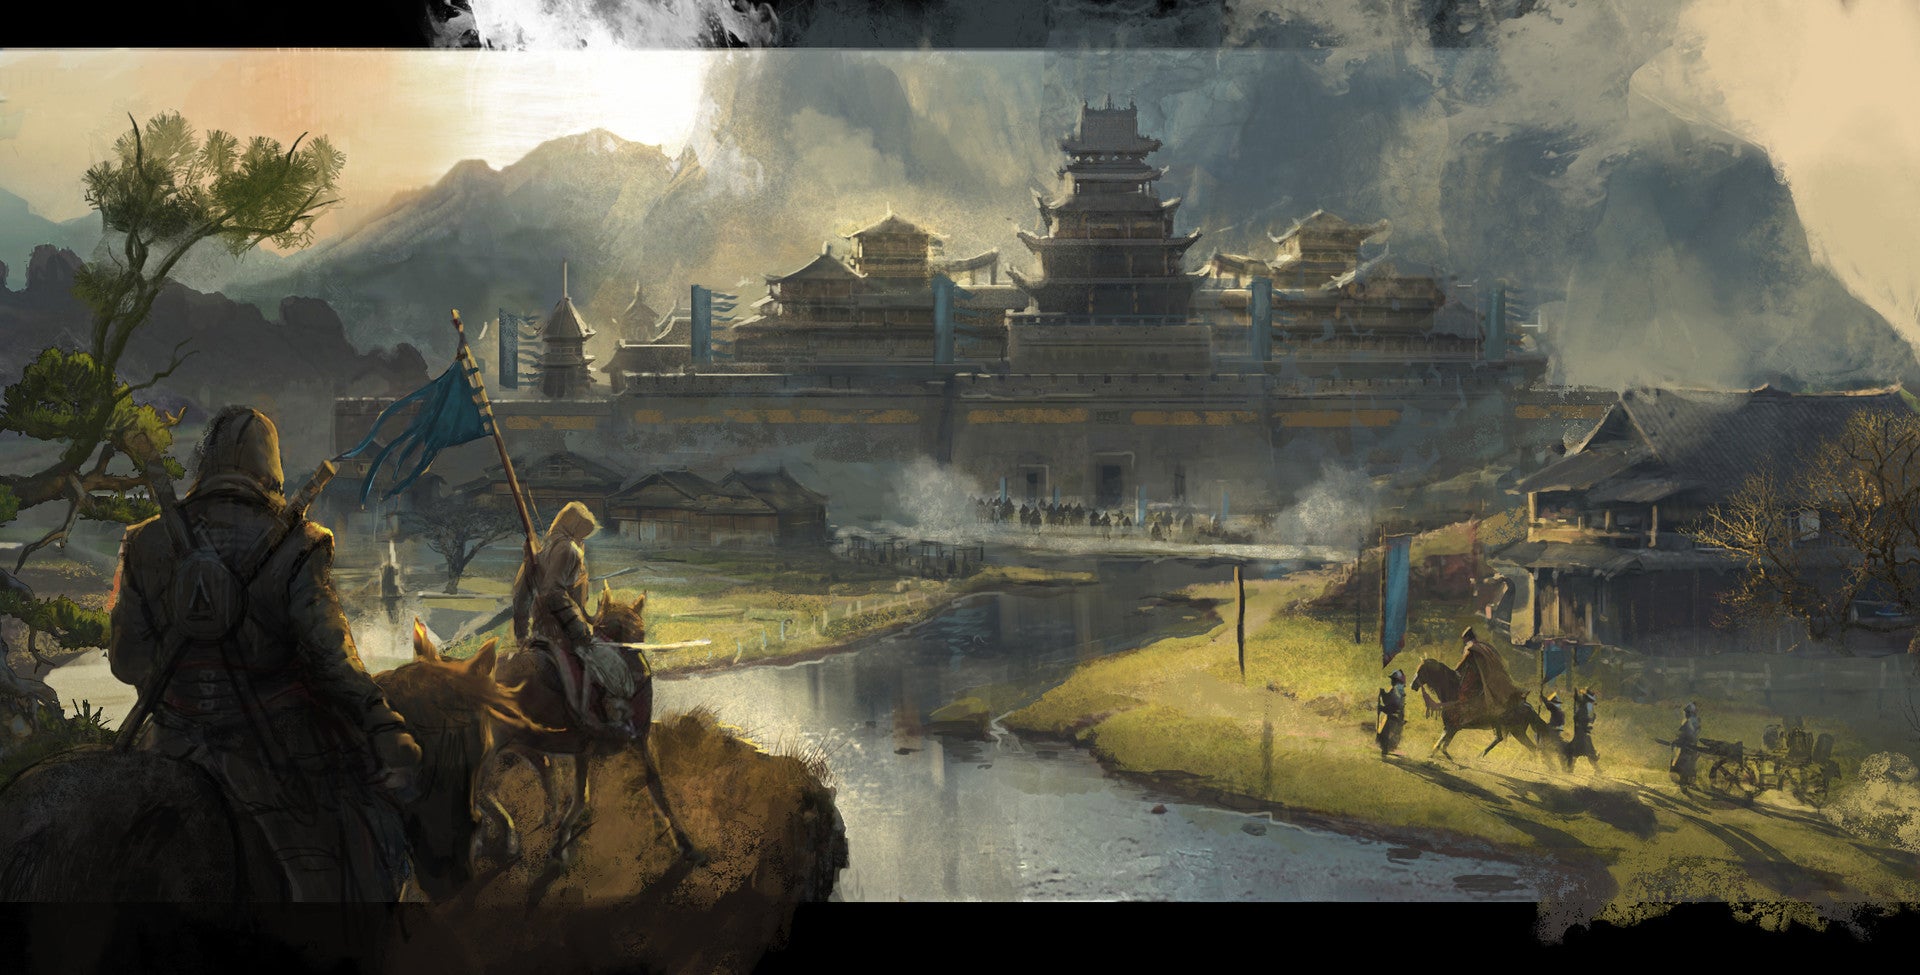 Image for Concept art for an Assassin's Creed game set in China has surfaced online